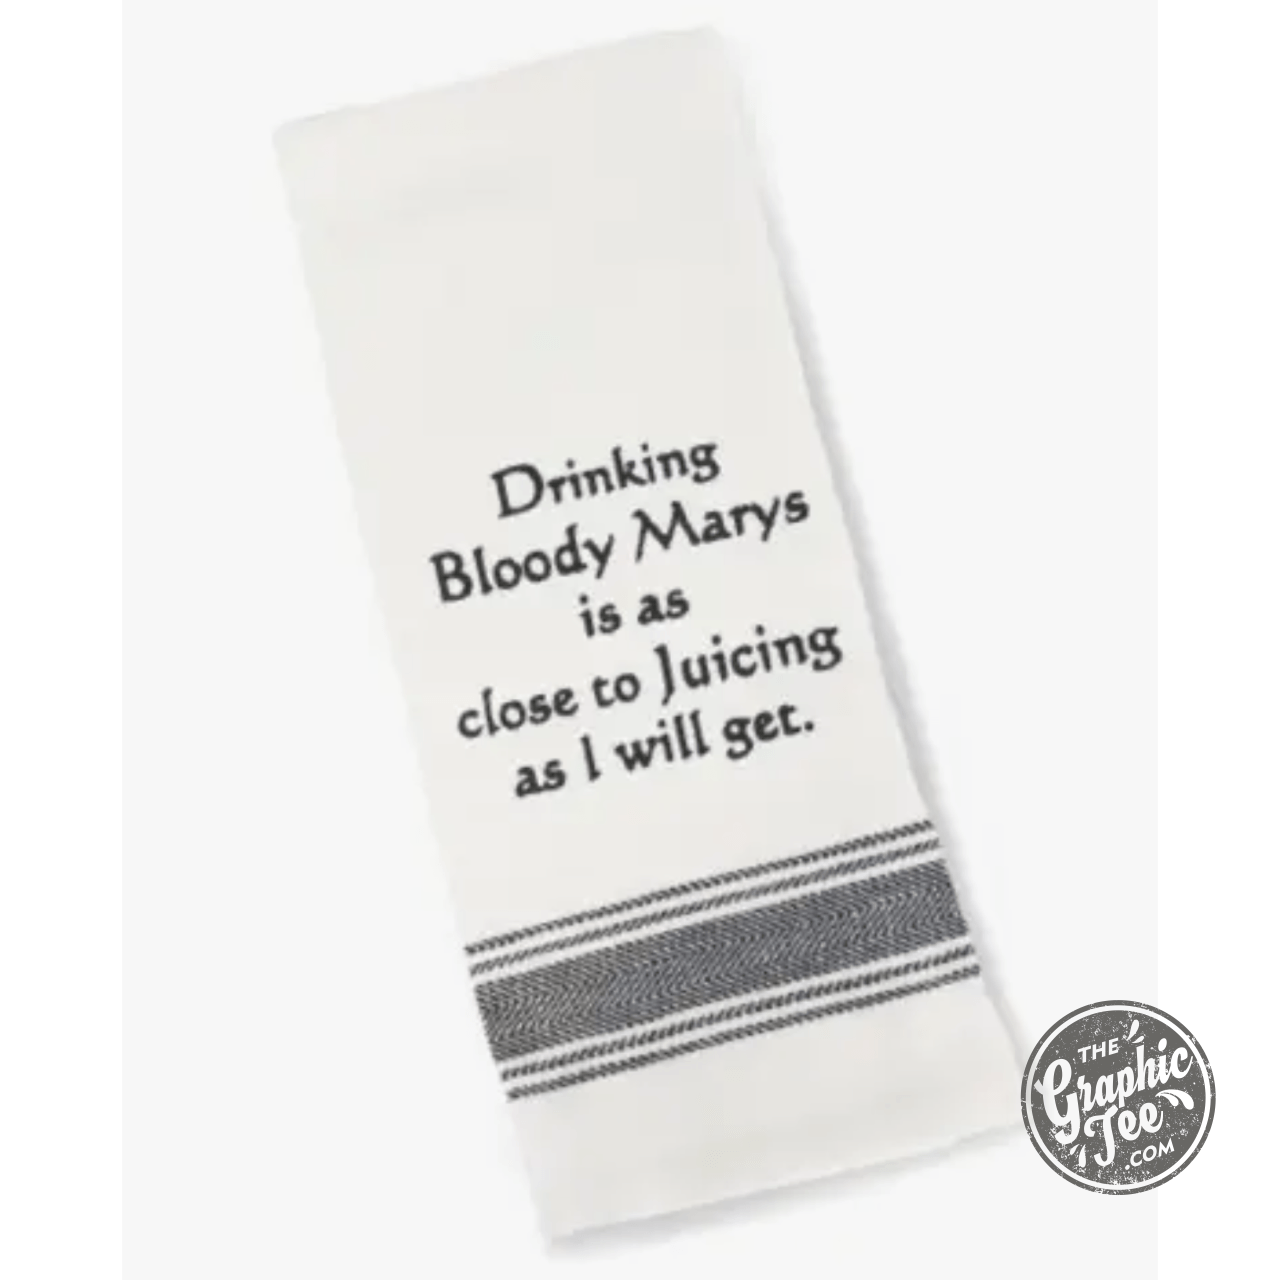 Hand Towel - Drinking Bloody Marys Is As Close To Juicing As I Will Get - The Graphic Tee